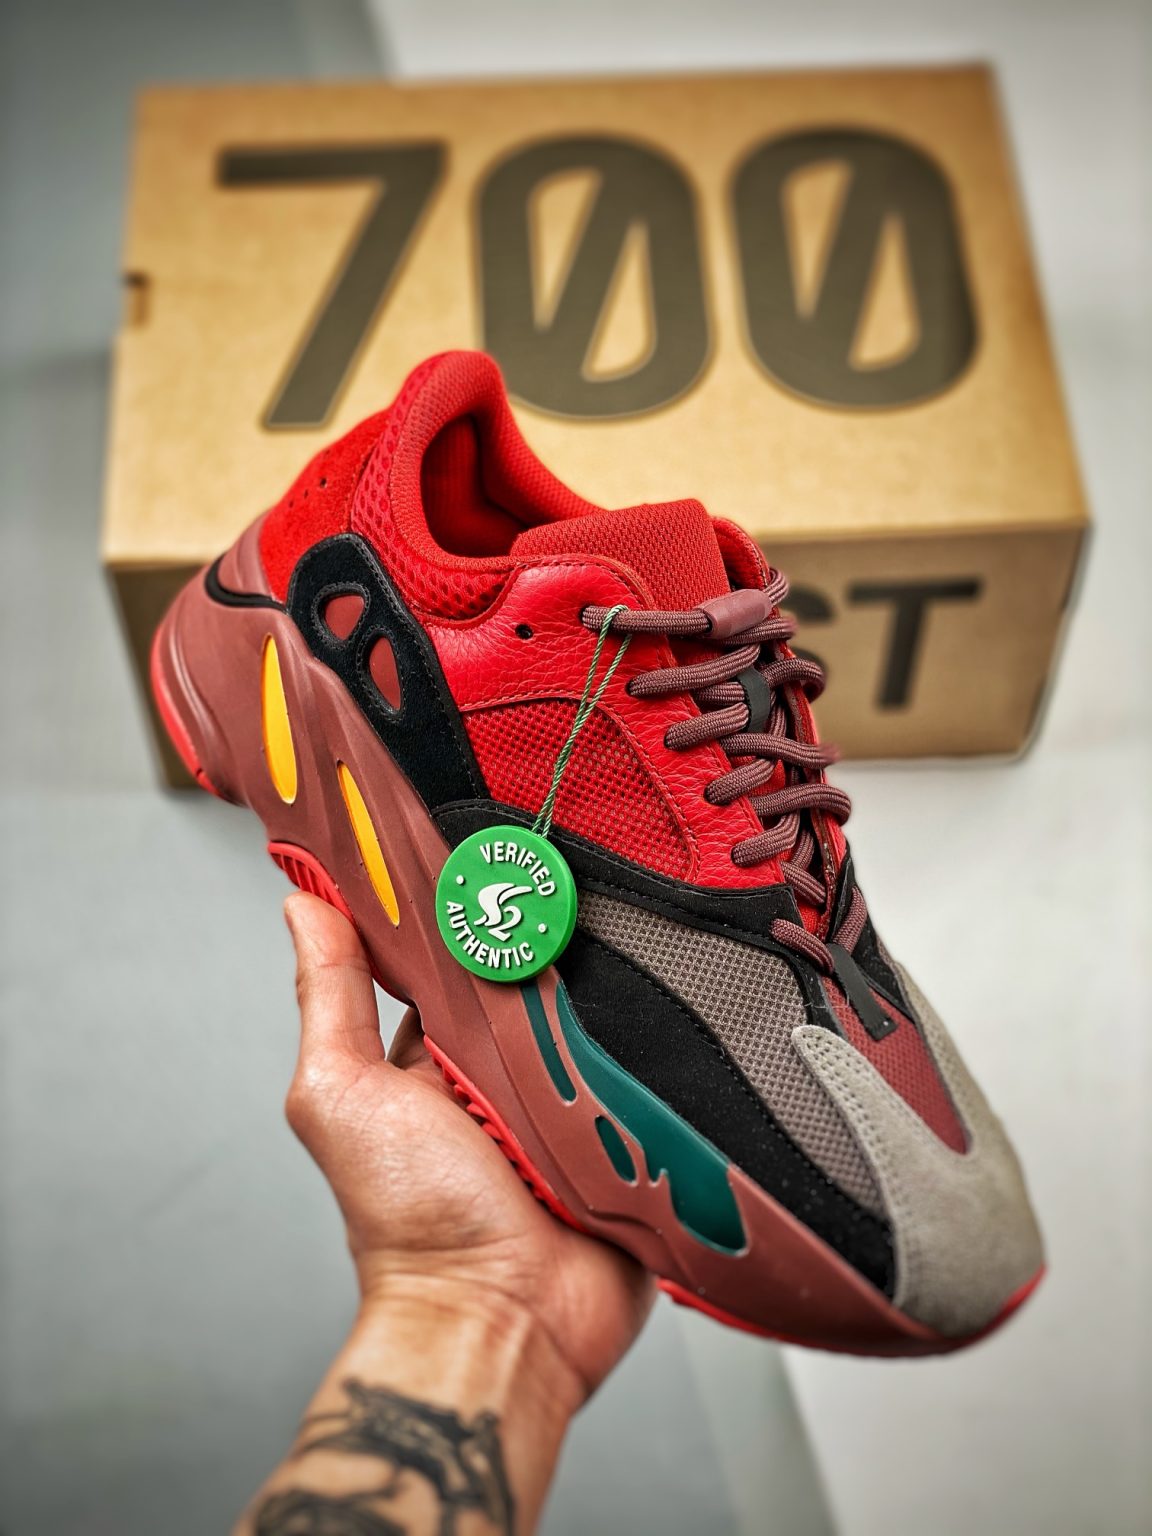 adidas Yeezy Boost 700 ‘Hi-Res Red’ HQ6979 For Sale – Sneaker Hello